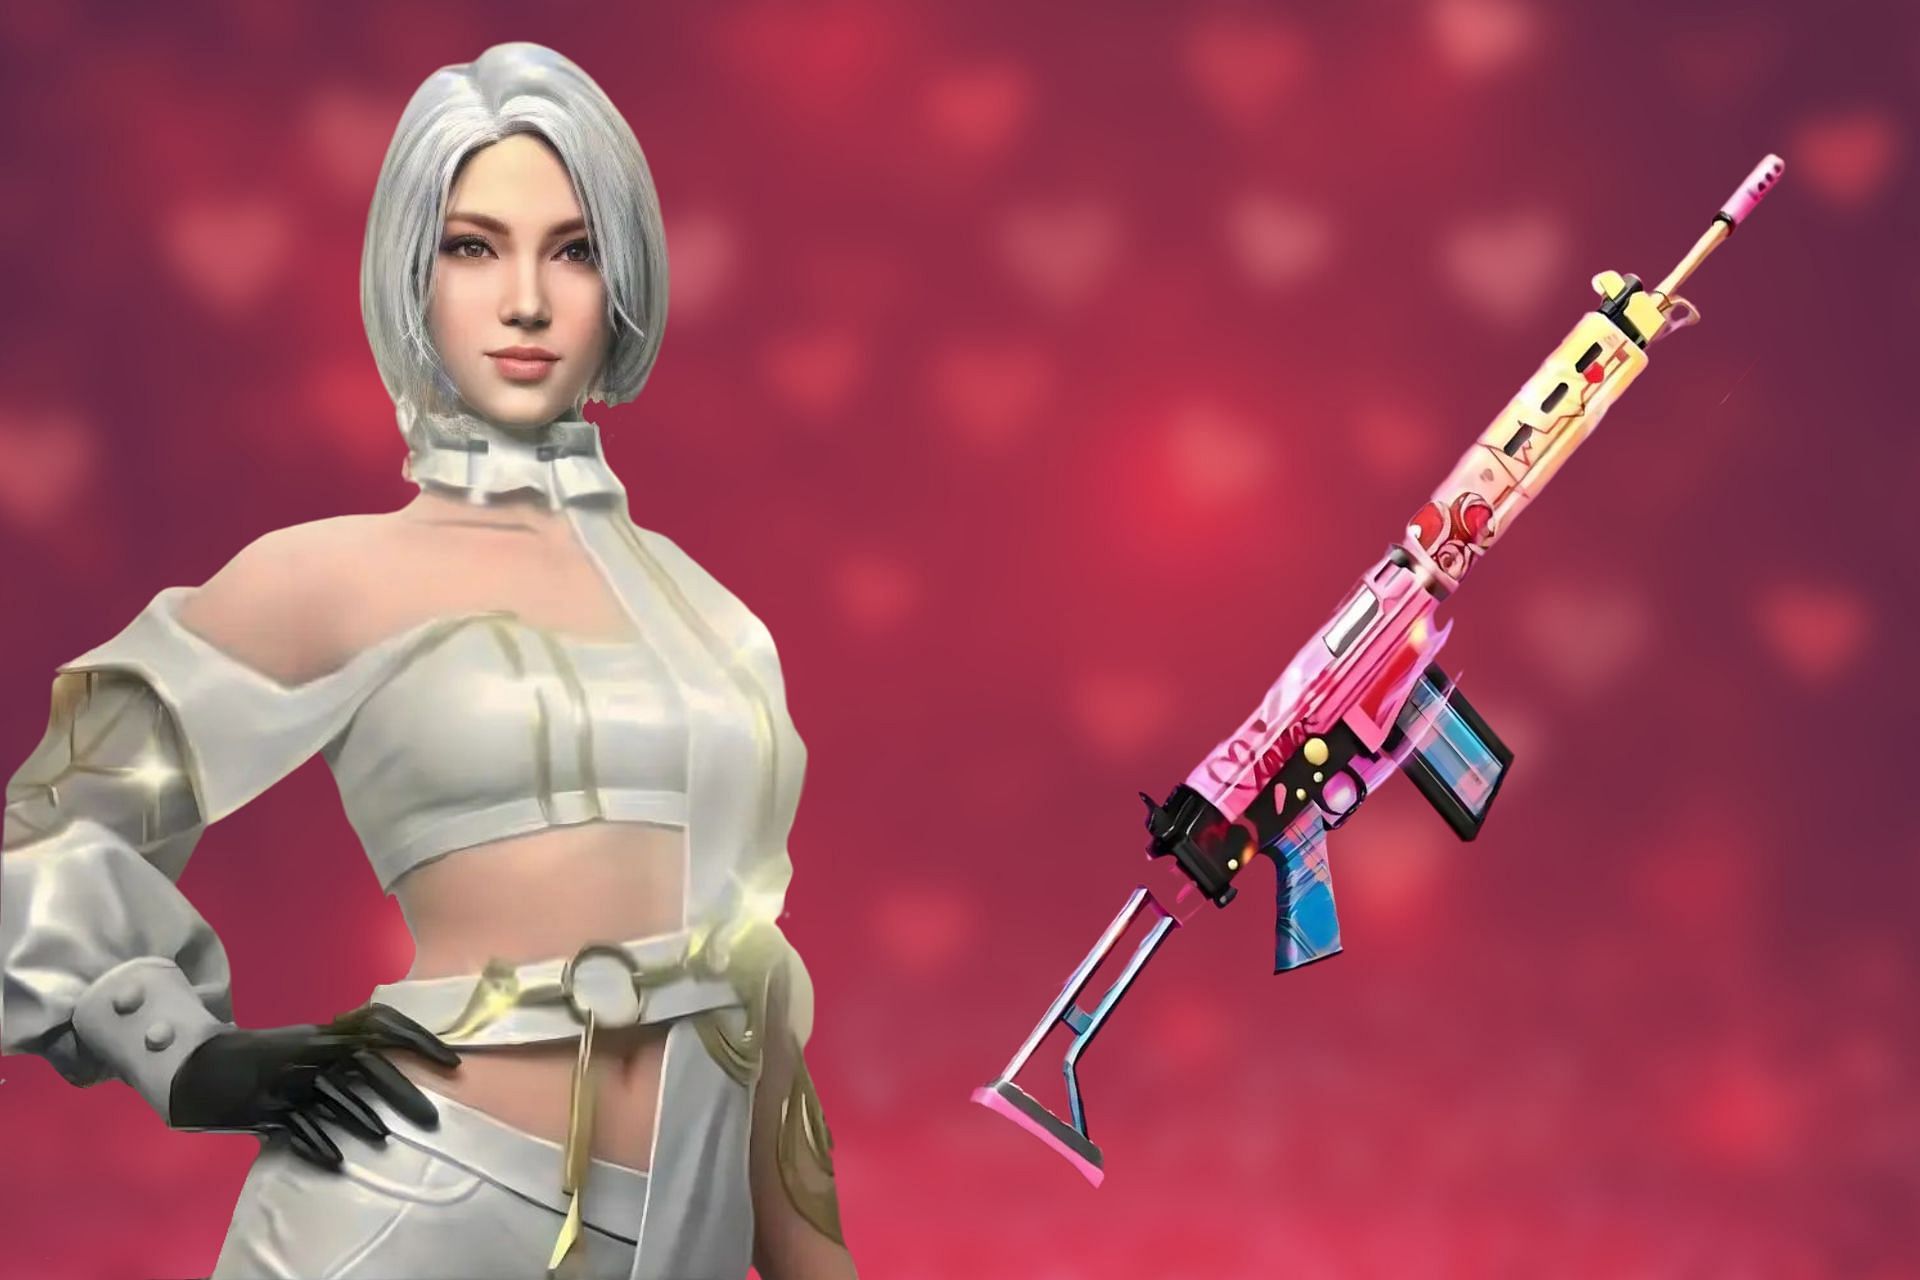 Upcoming Diamond Royale and Weapon Royale have been leaked (Image via Garena)